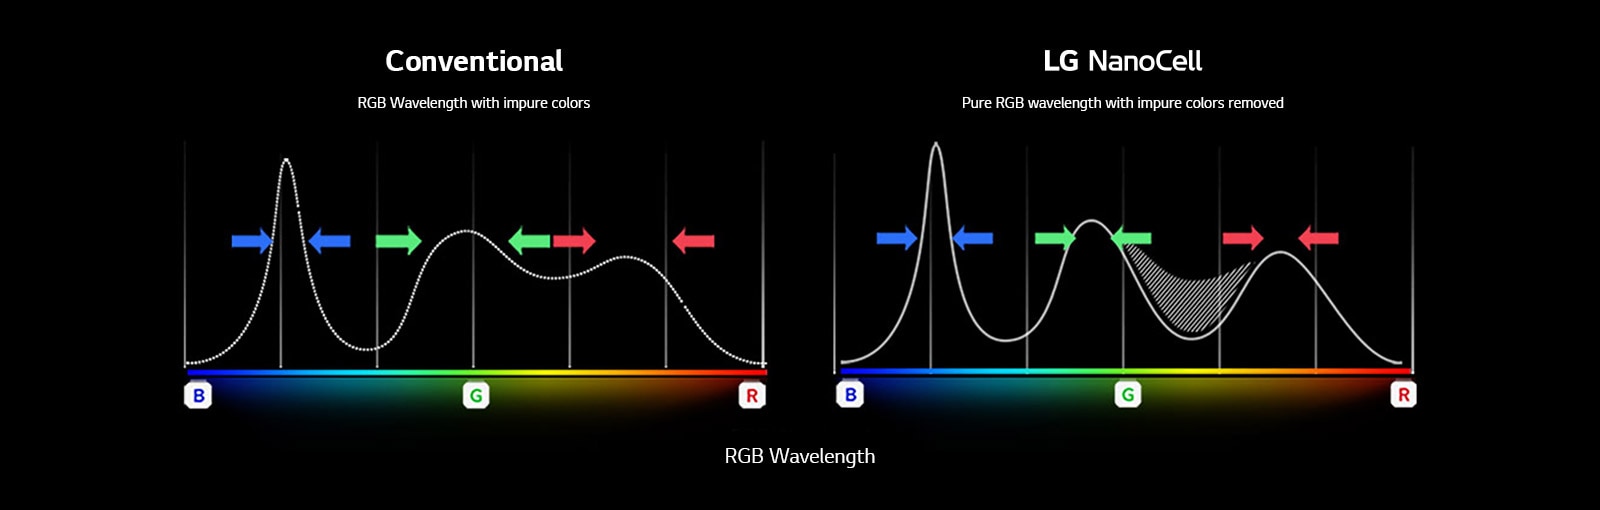 The RGB spectrum graph that shows the filtering of dull colors